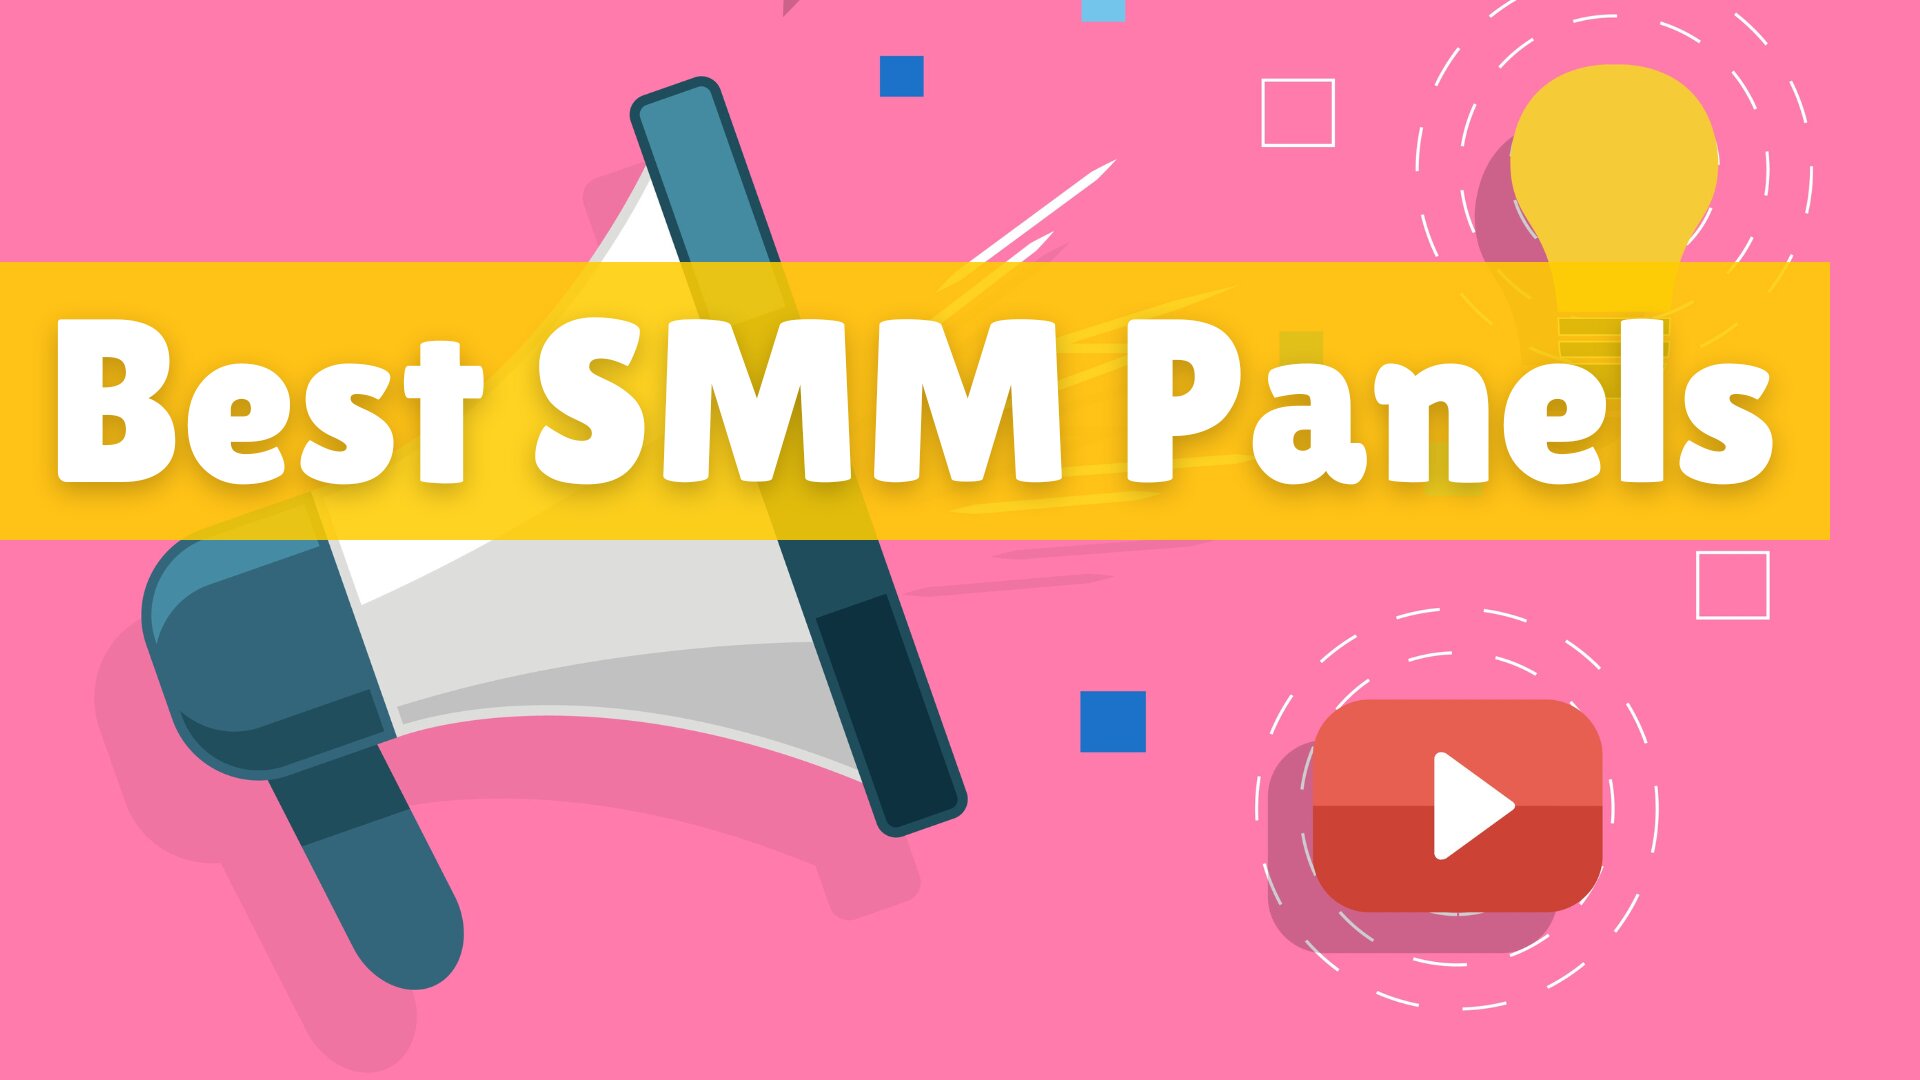 How to Choose the Right SMM Panel for Your Needs